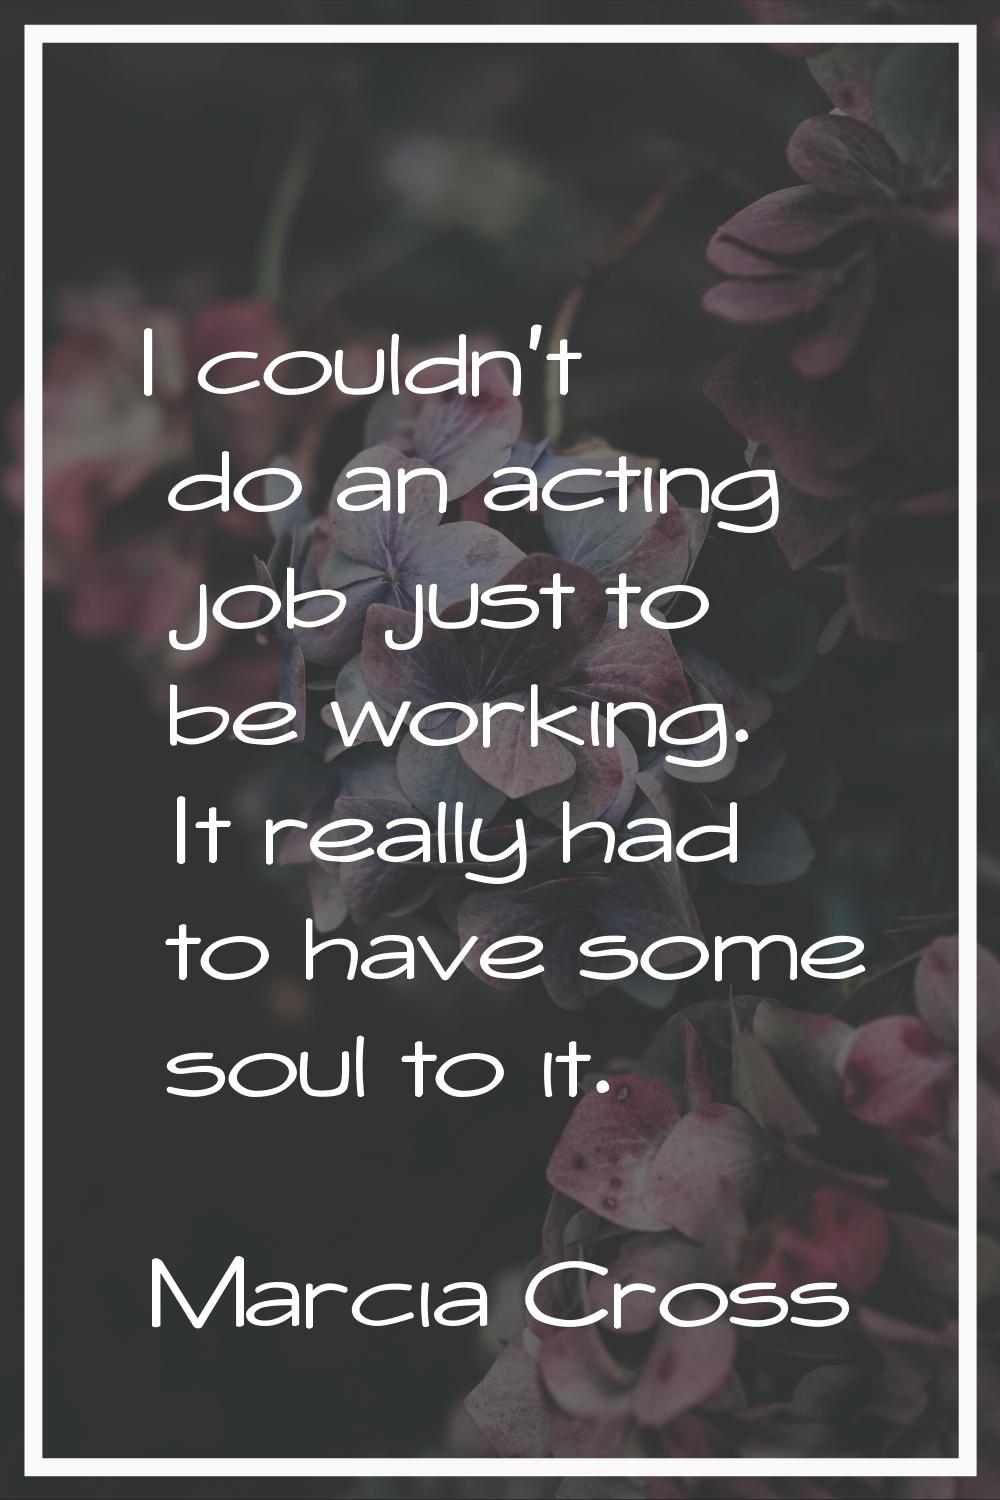 I couldn't do an acting job just to be working. It really had to have some soul to it.